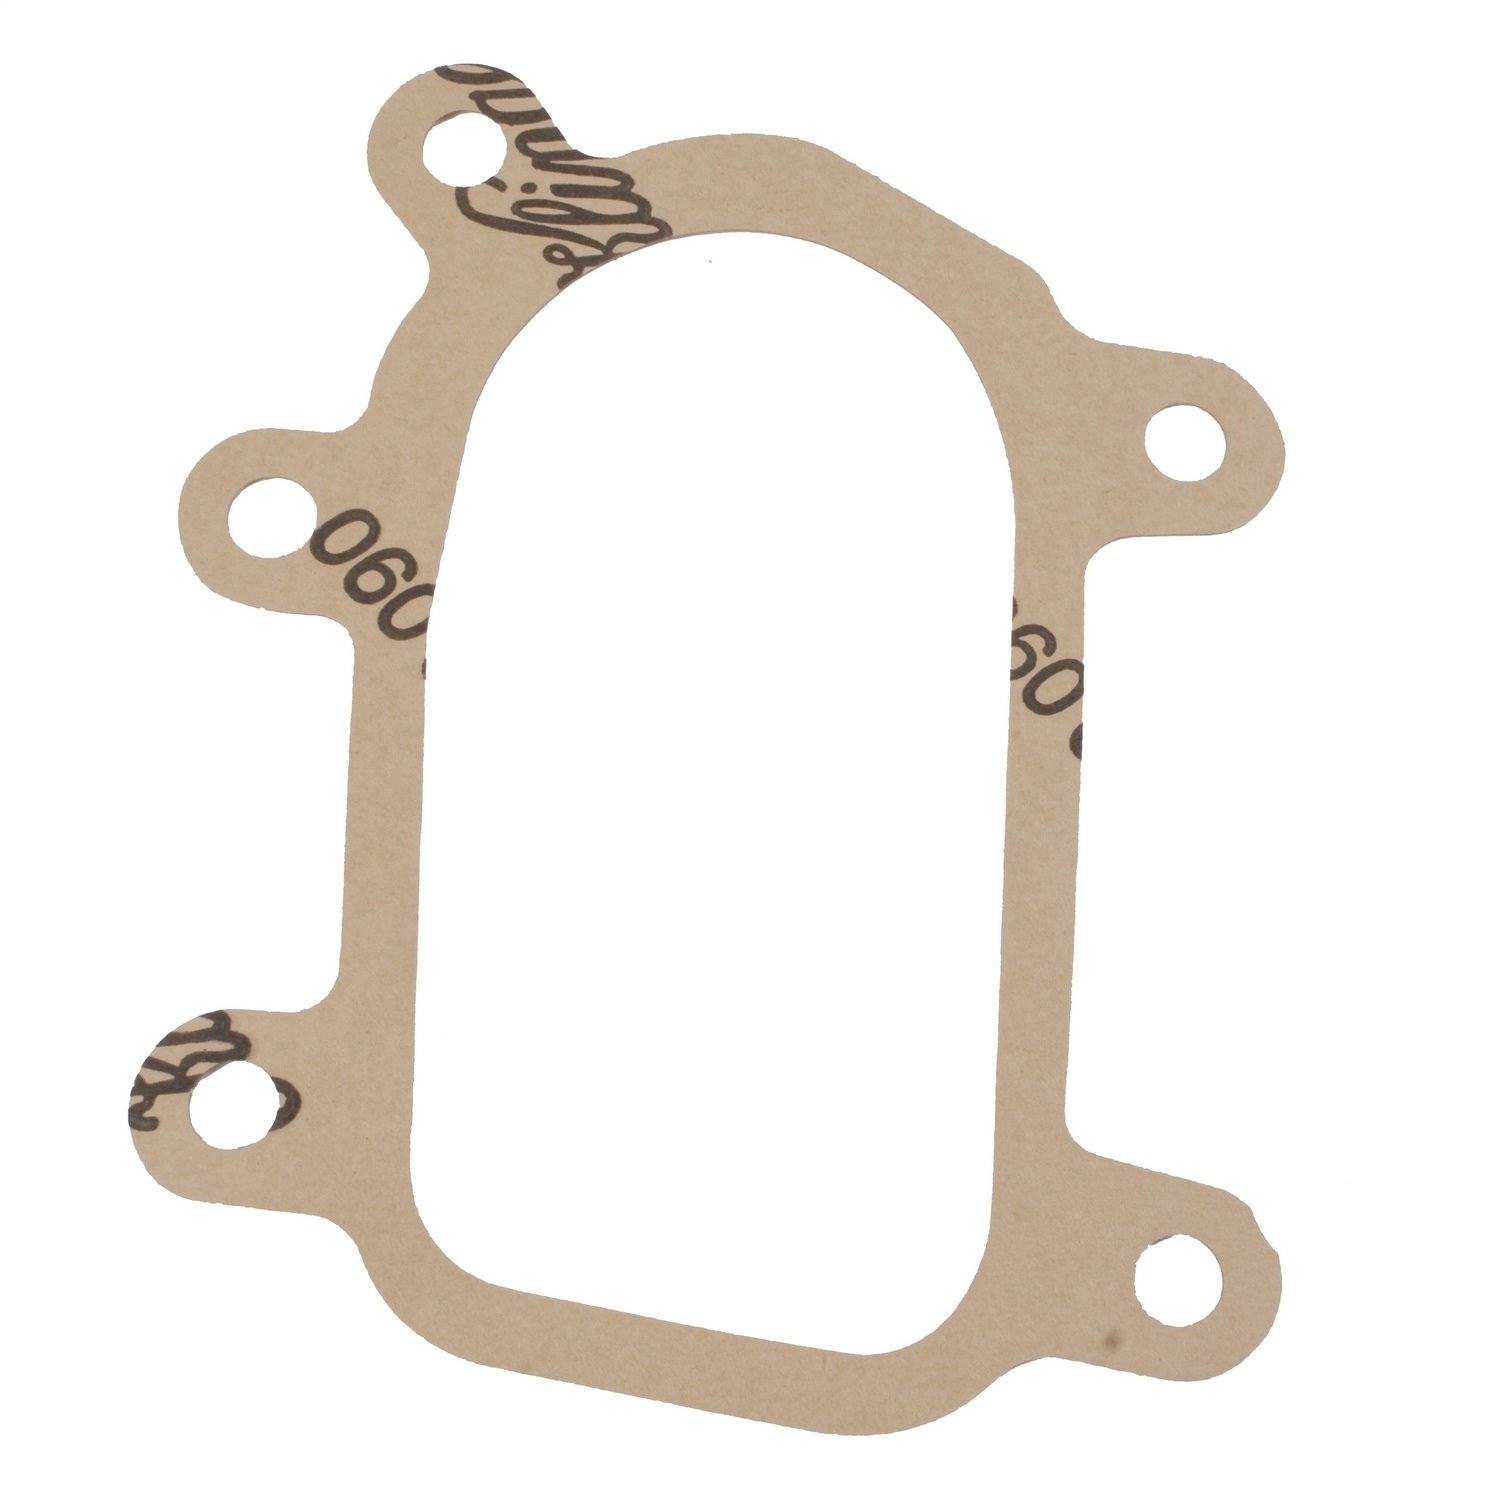 Replacement transfer case gasket from Omix-ADA, Fits for front half of Dana 18 transfer case